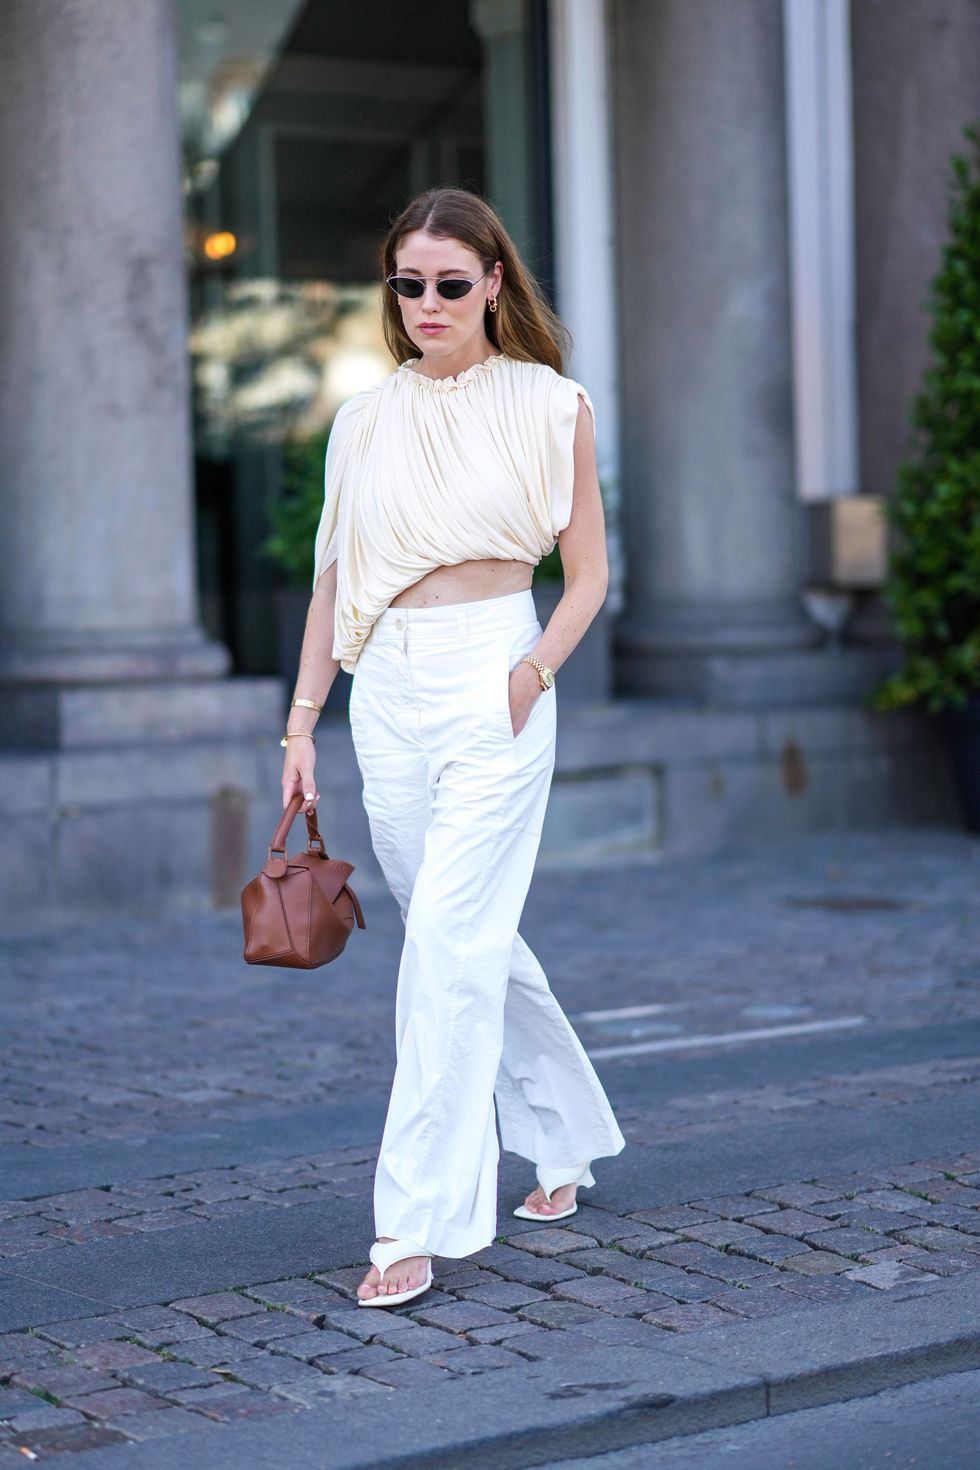 40+ Best Wide Leg Pants Outfit Ideas, How To Wear Wide Leg Pants, Trousers Outfit, Summe…